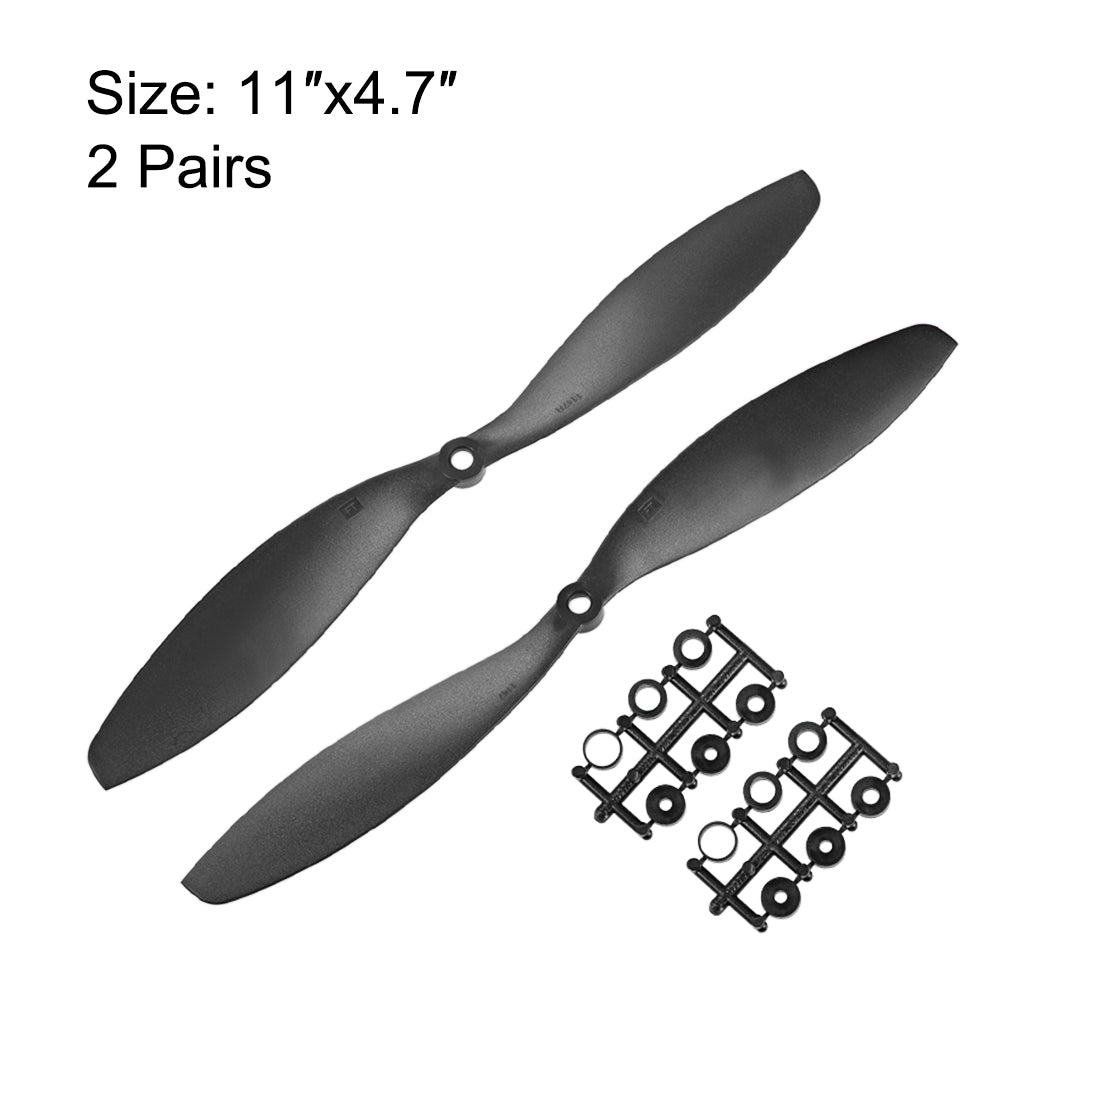 uxcell Uxcell RC Propellers CW CCW 1147 11x4.7 Inch 2-Vane Fixed-Wing for Airplane Toy, Nylon Black 2 Pair with Adapter Rings